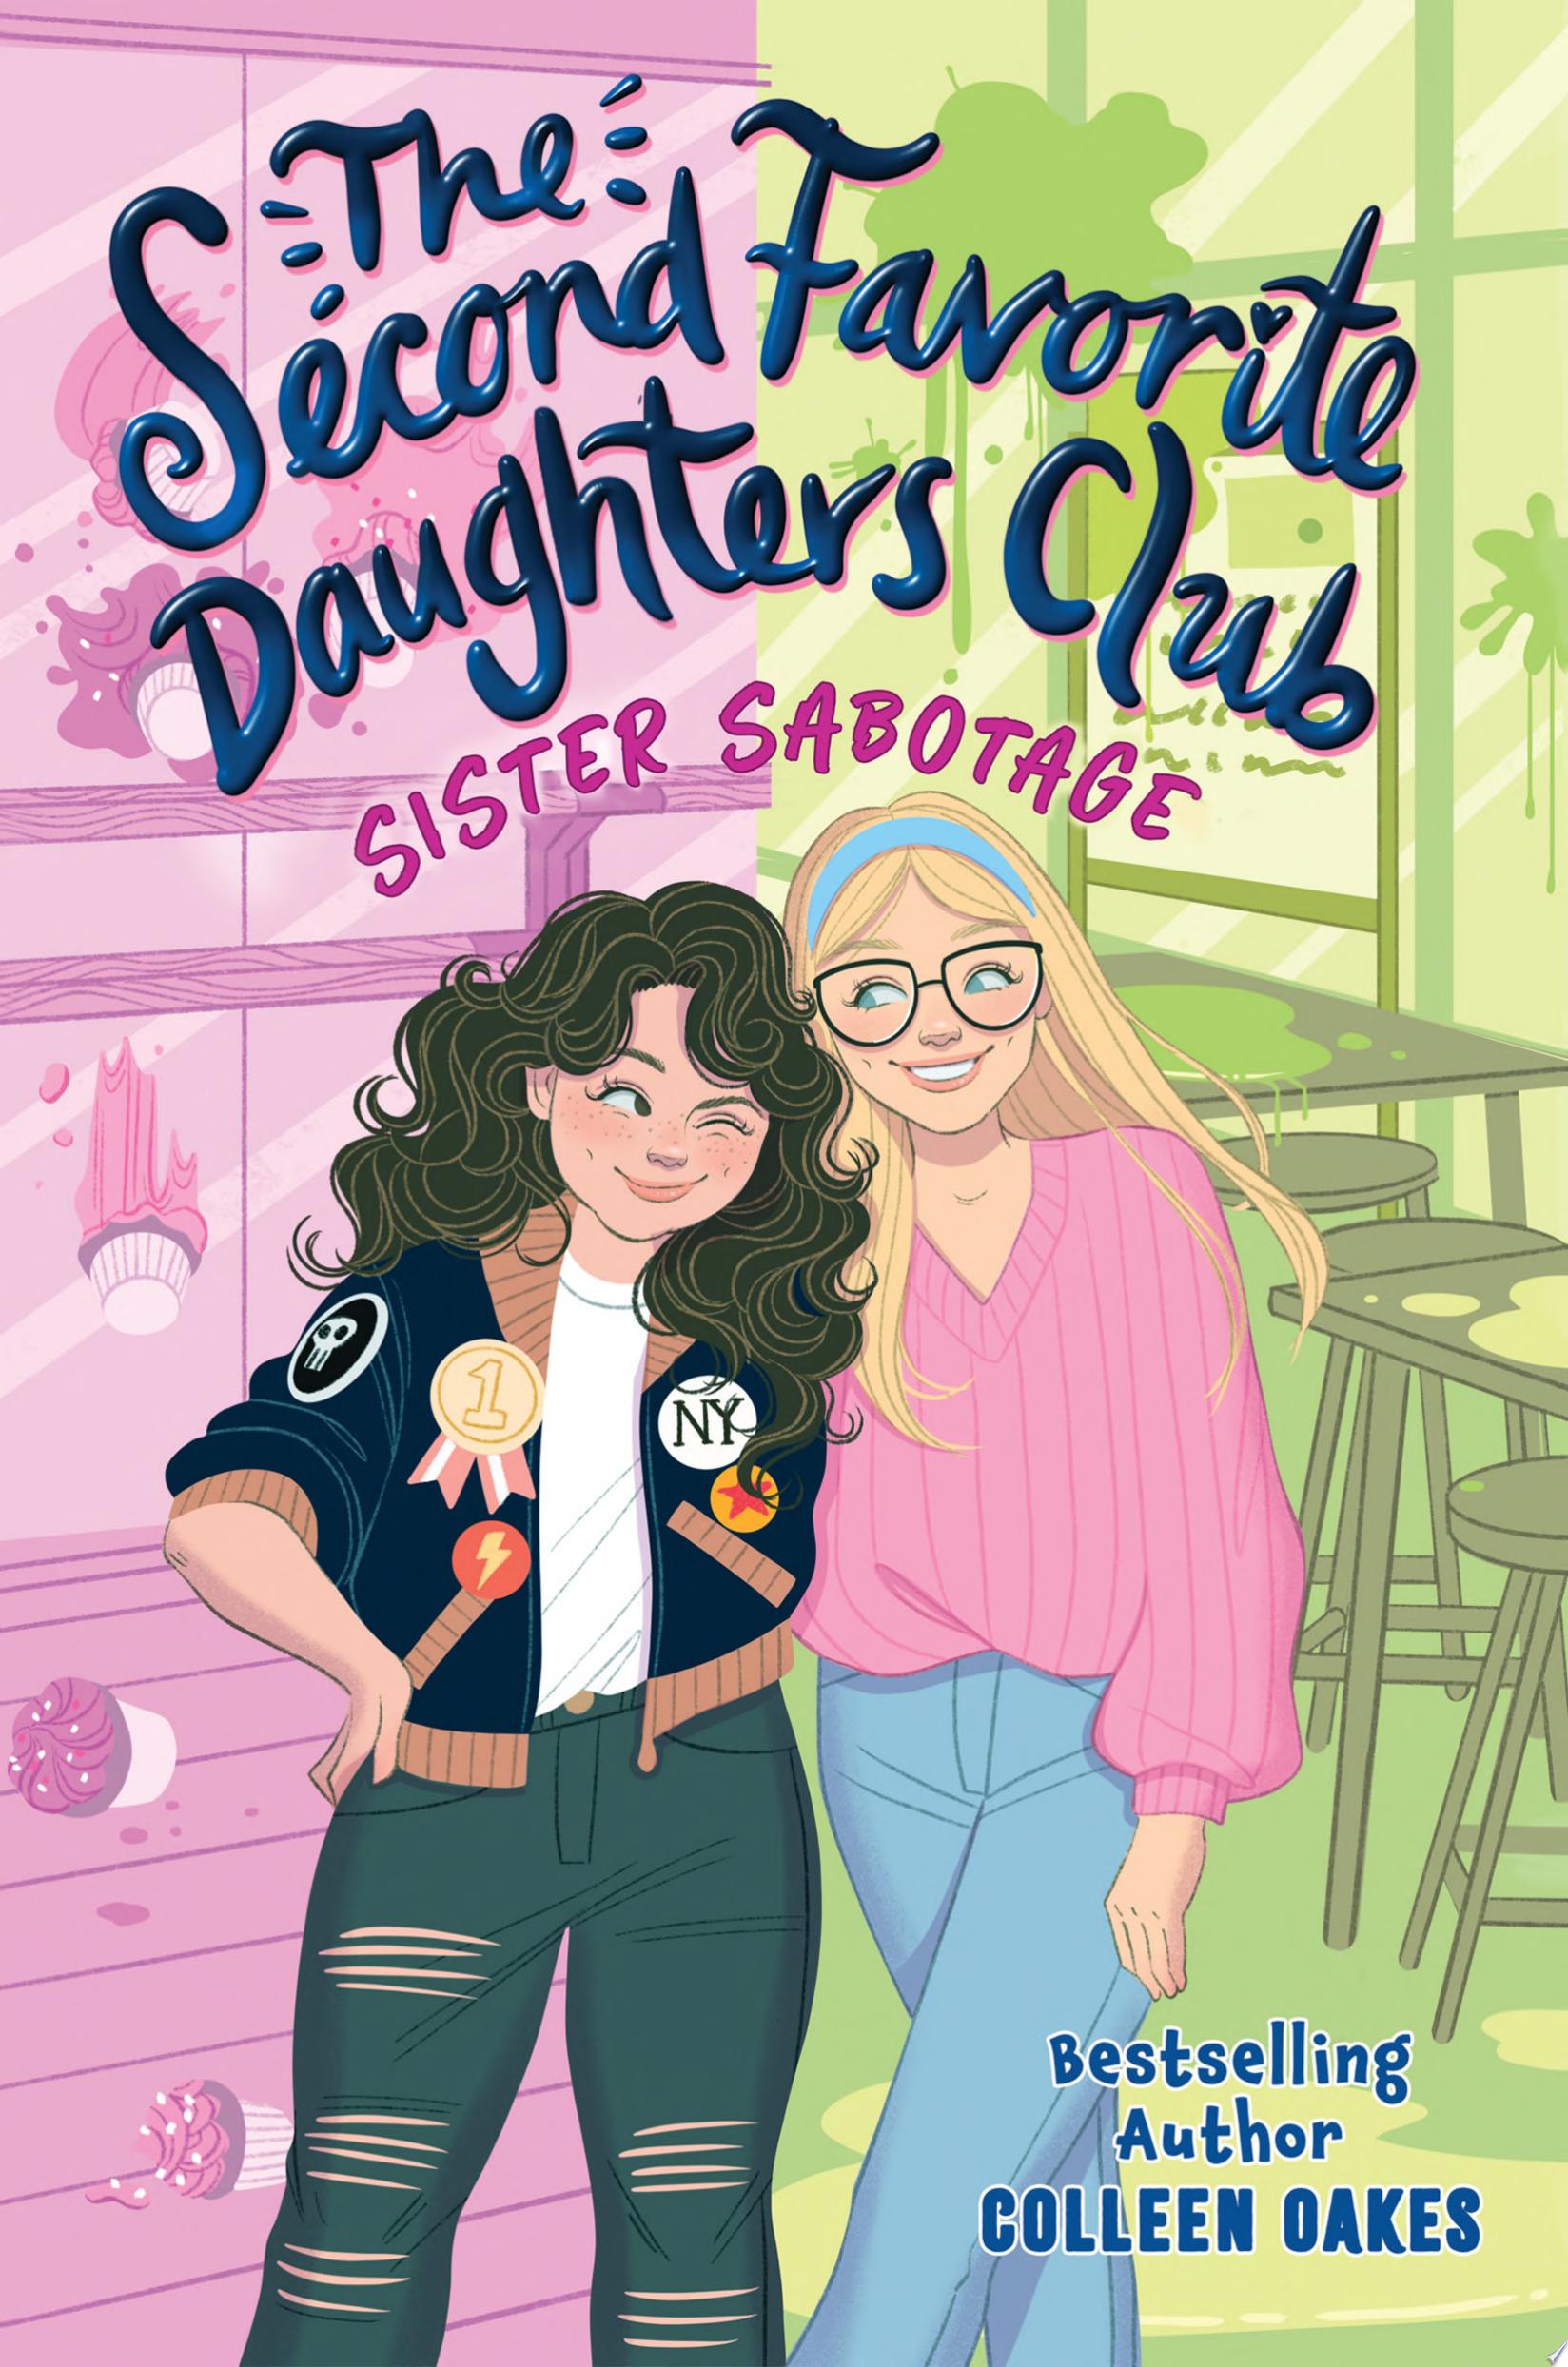 Image for "The Second Favorite Daughters Club 1: Sister Sabotage"